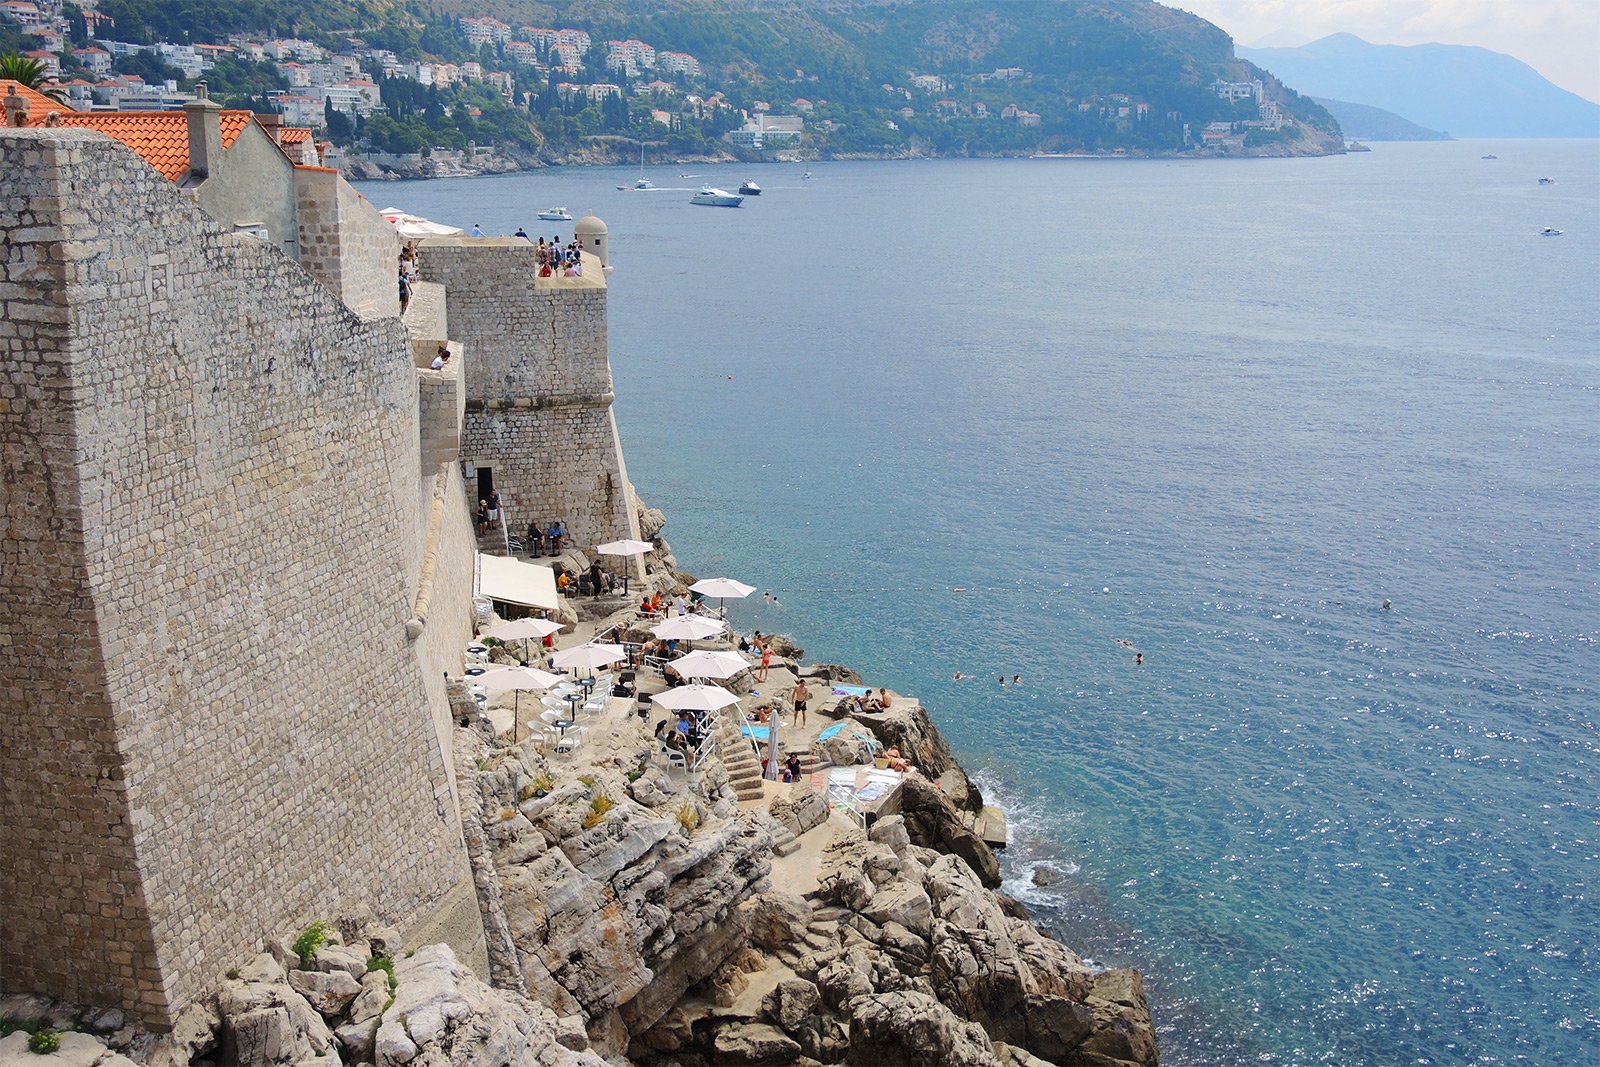 How to visit a cafe on the cliff in Dubrovnik